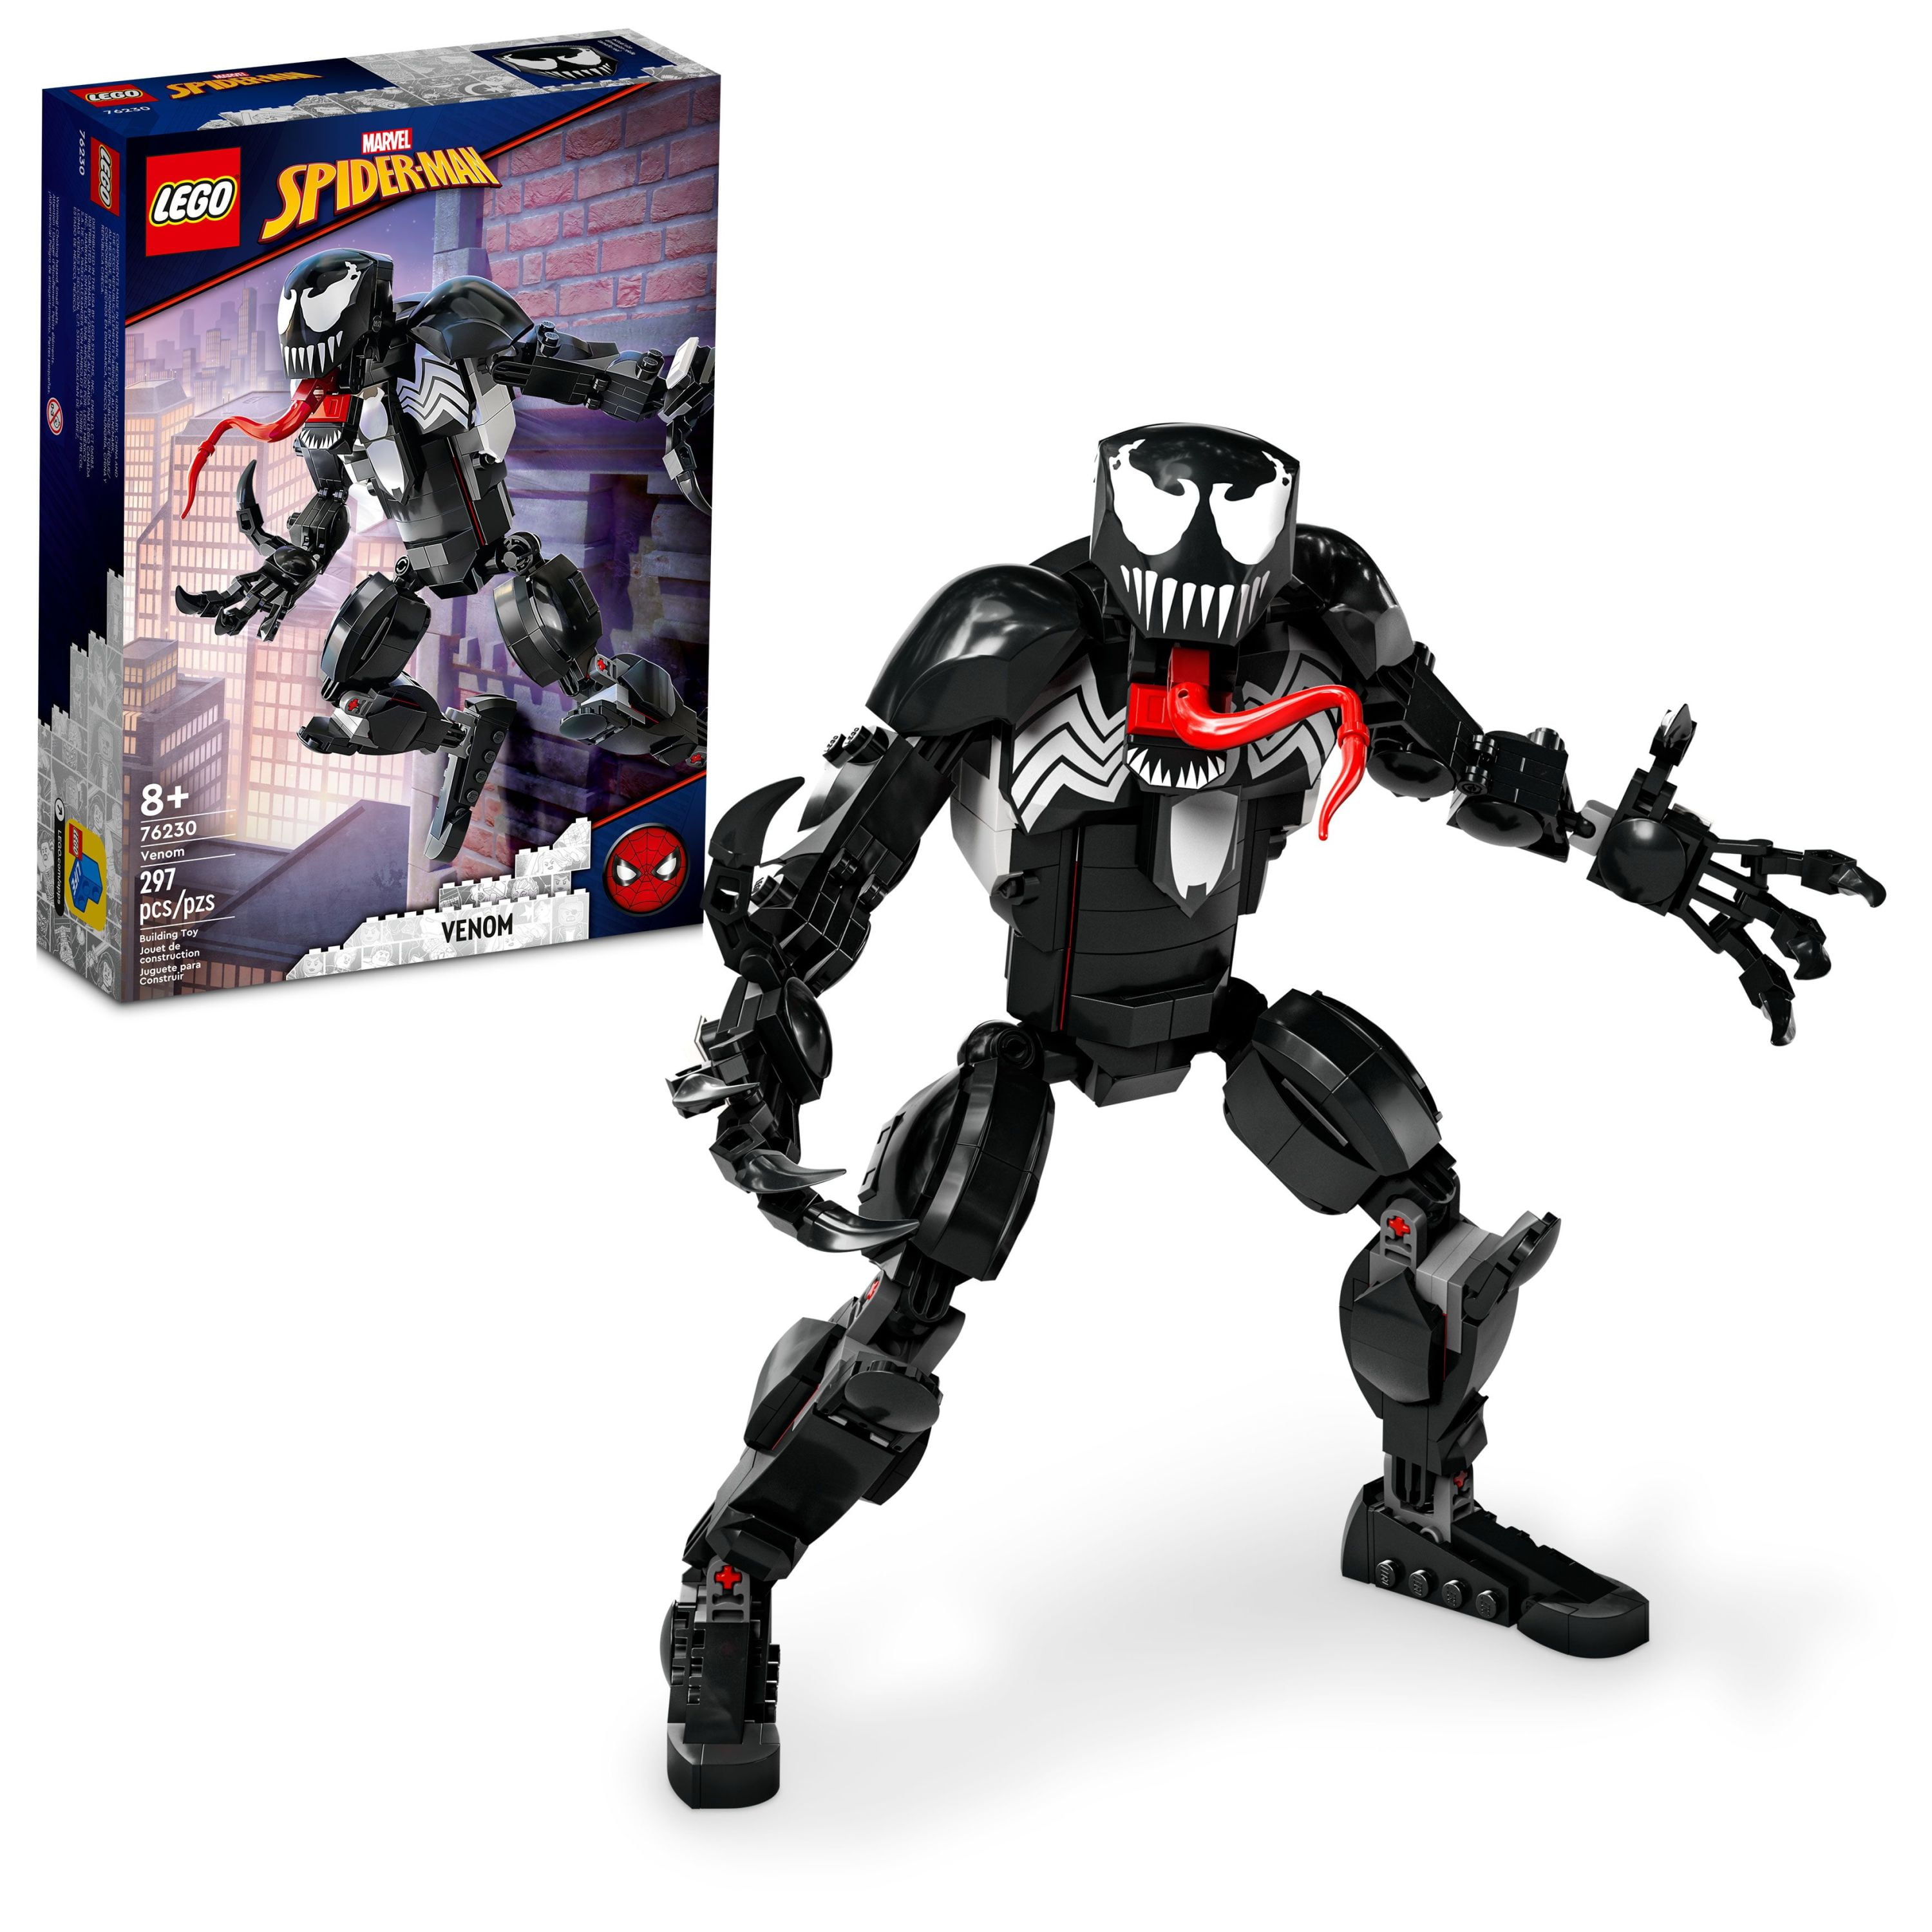 LEGO Marvel Venom Figure, 76230 Fully Articulated Super Villain Action Toy, Spider-Man Universe Collectible Set, Alien Toys for Boys and Girls